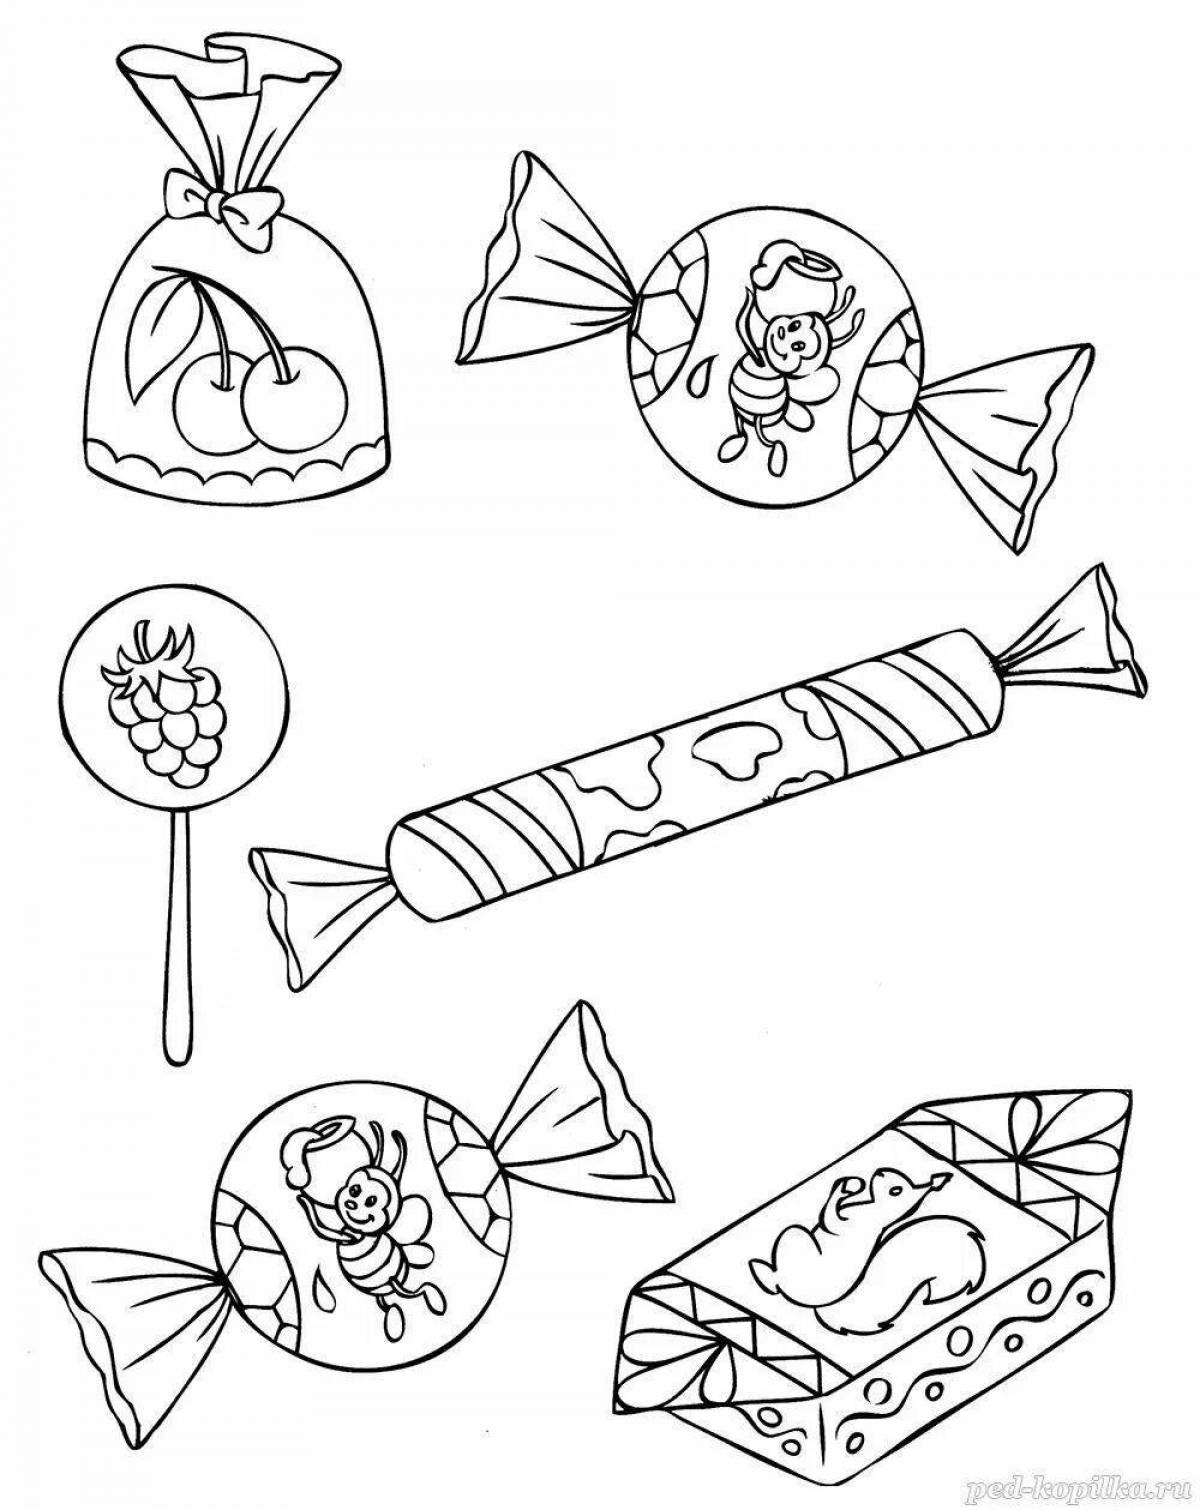 Splendid candy figure coloring page